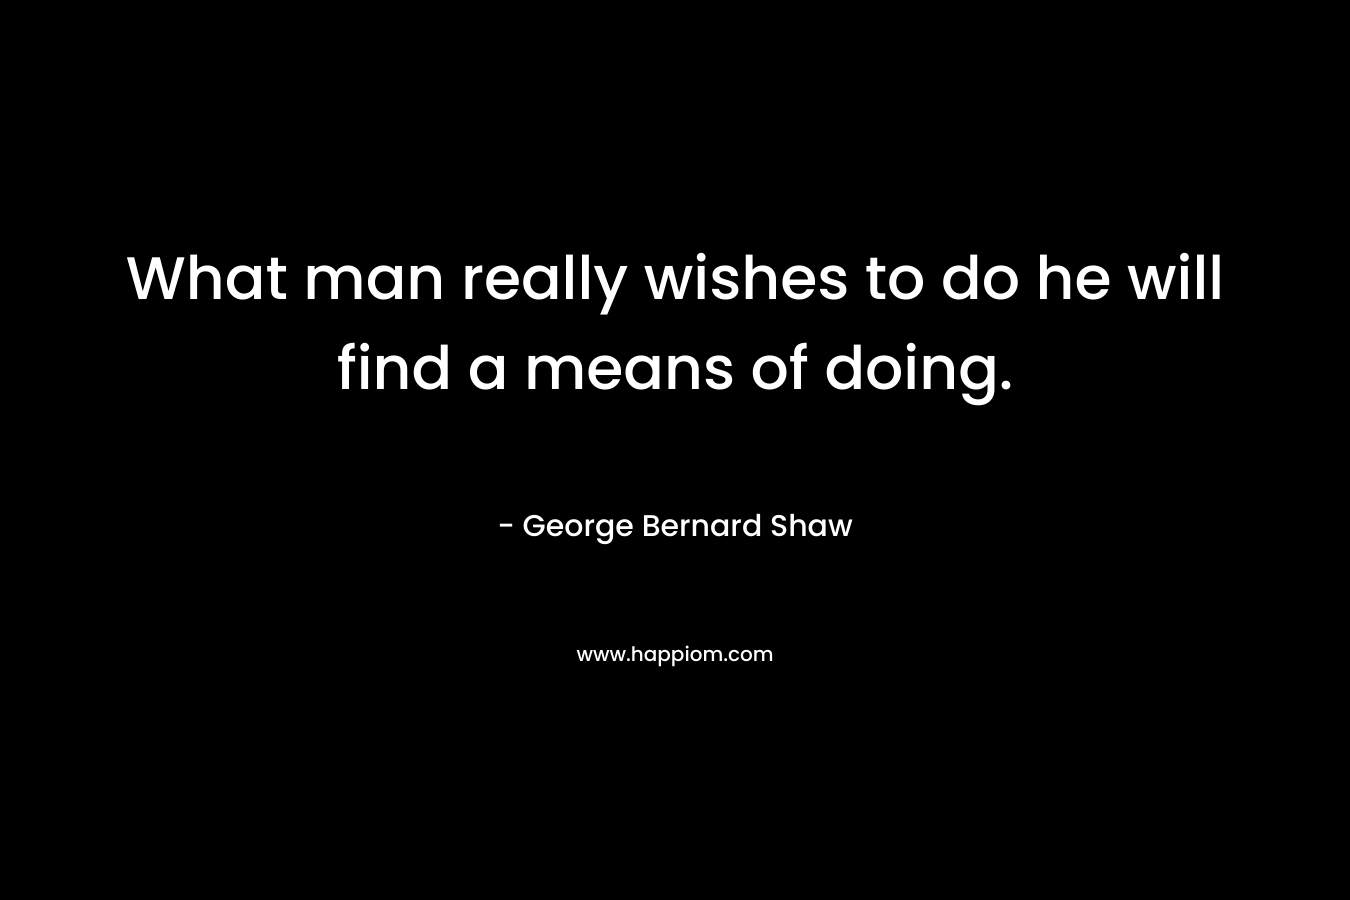 What man really wishes to do he will find a means of doing. – George Bernard Shaw